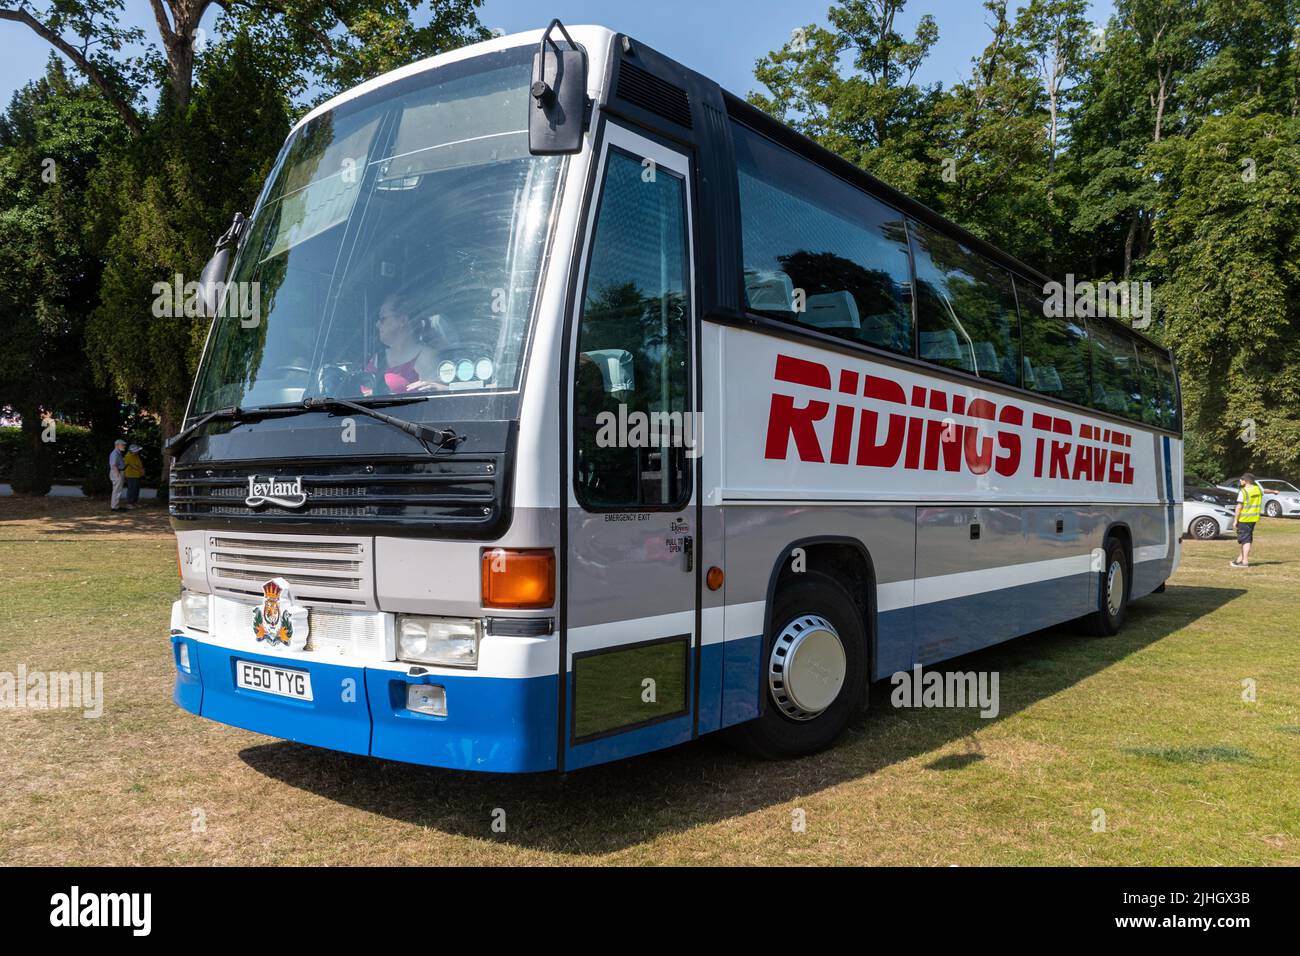 Ridings Travel Coach, a Leyland bus manufactured in 1988 Stock Photo